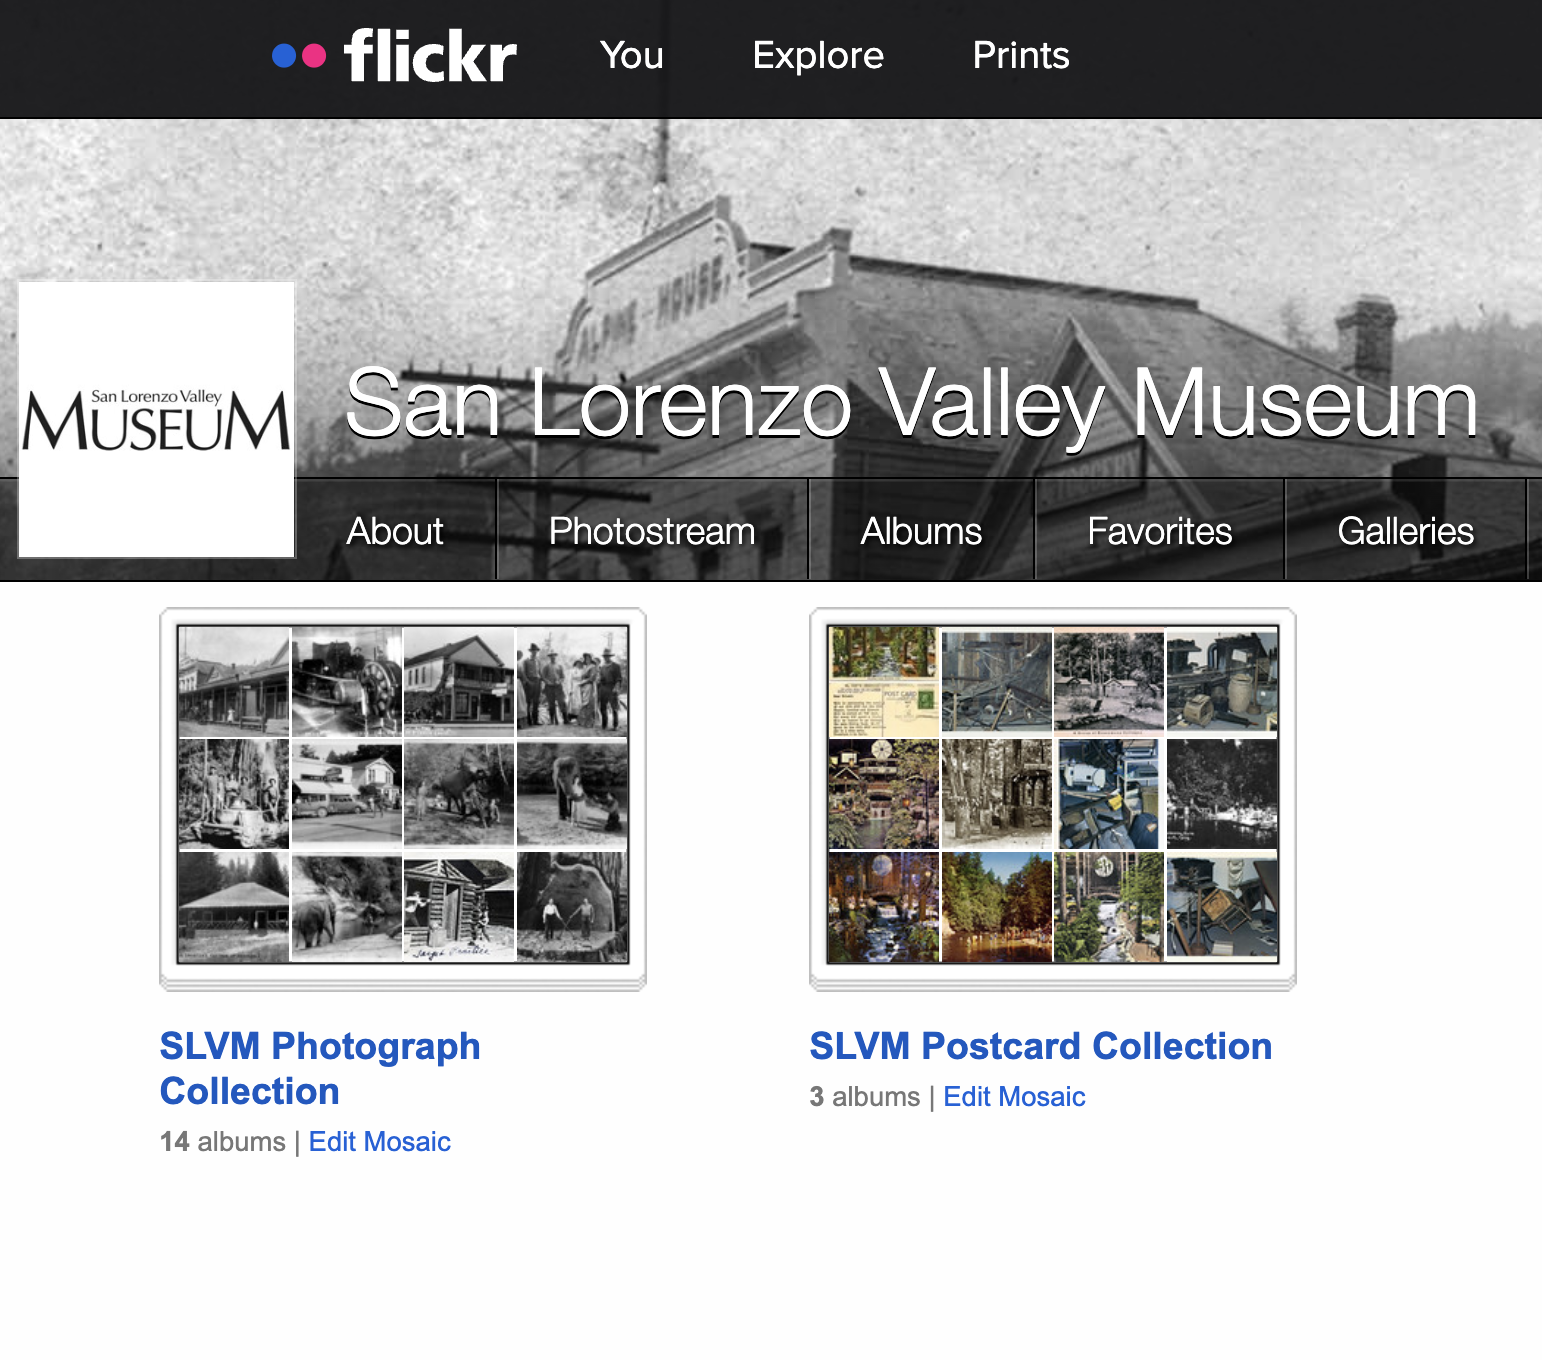 Photograph & Postcard Collection at Flickr.com